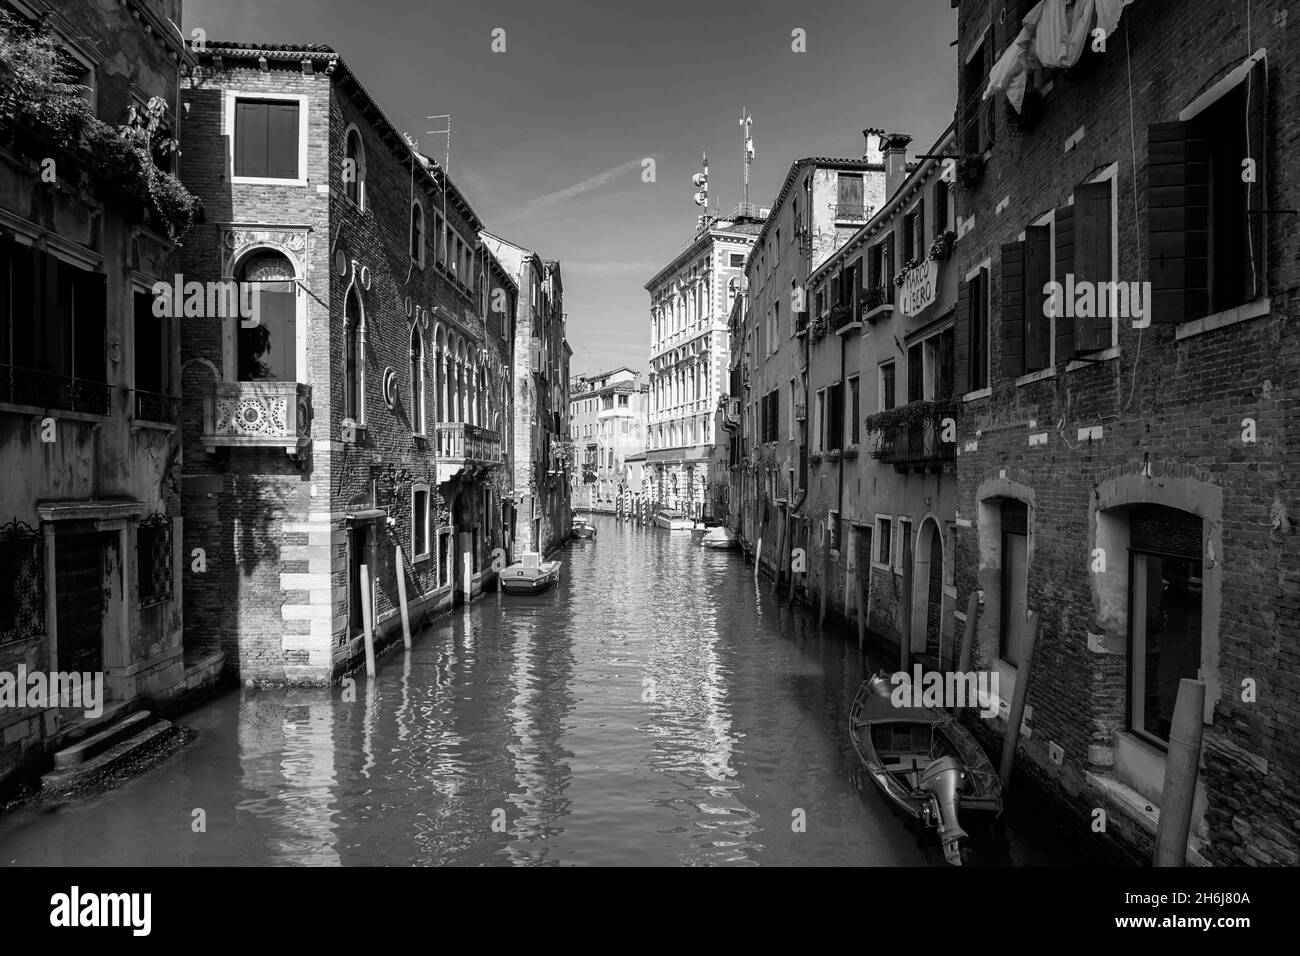 Venice, Italy - 15 October, 2021: narrow canals in the old city center of Venice Stock Photo